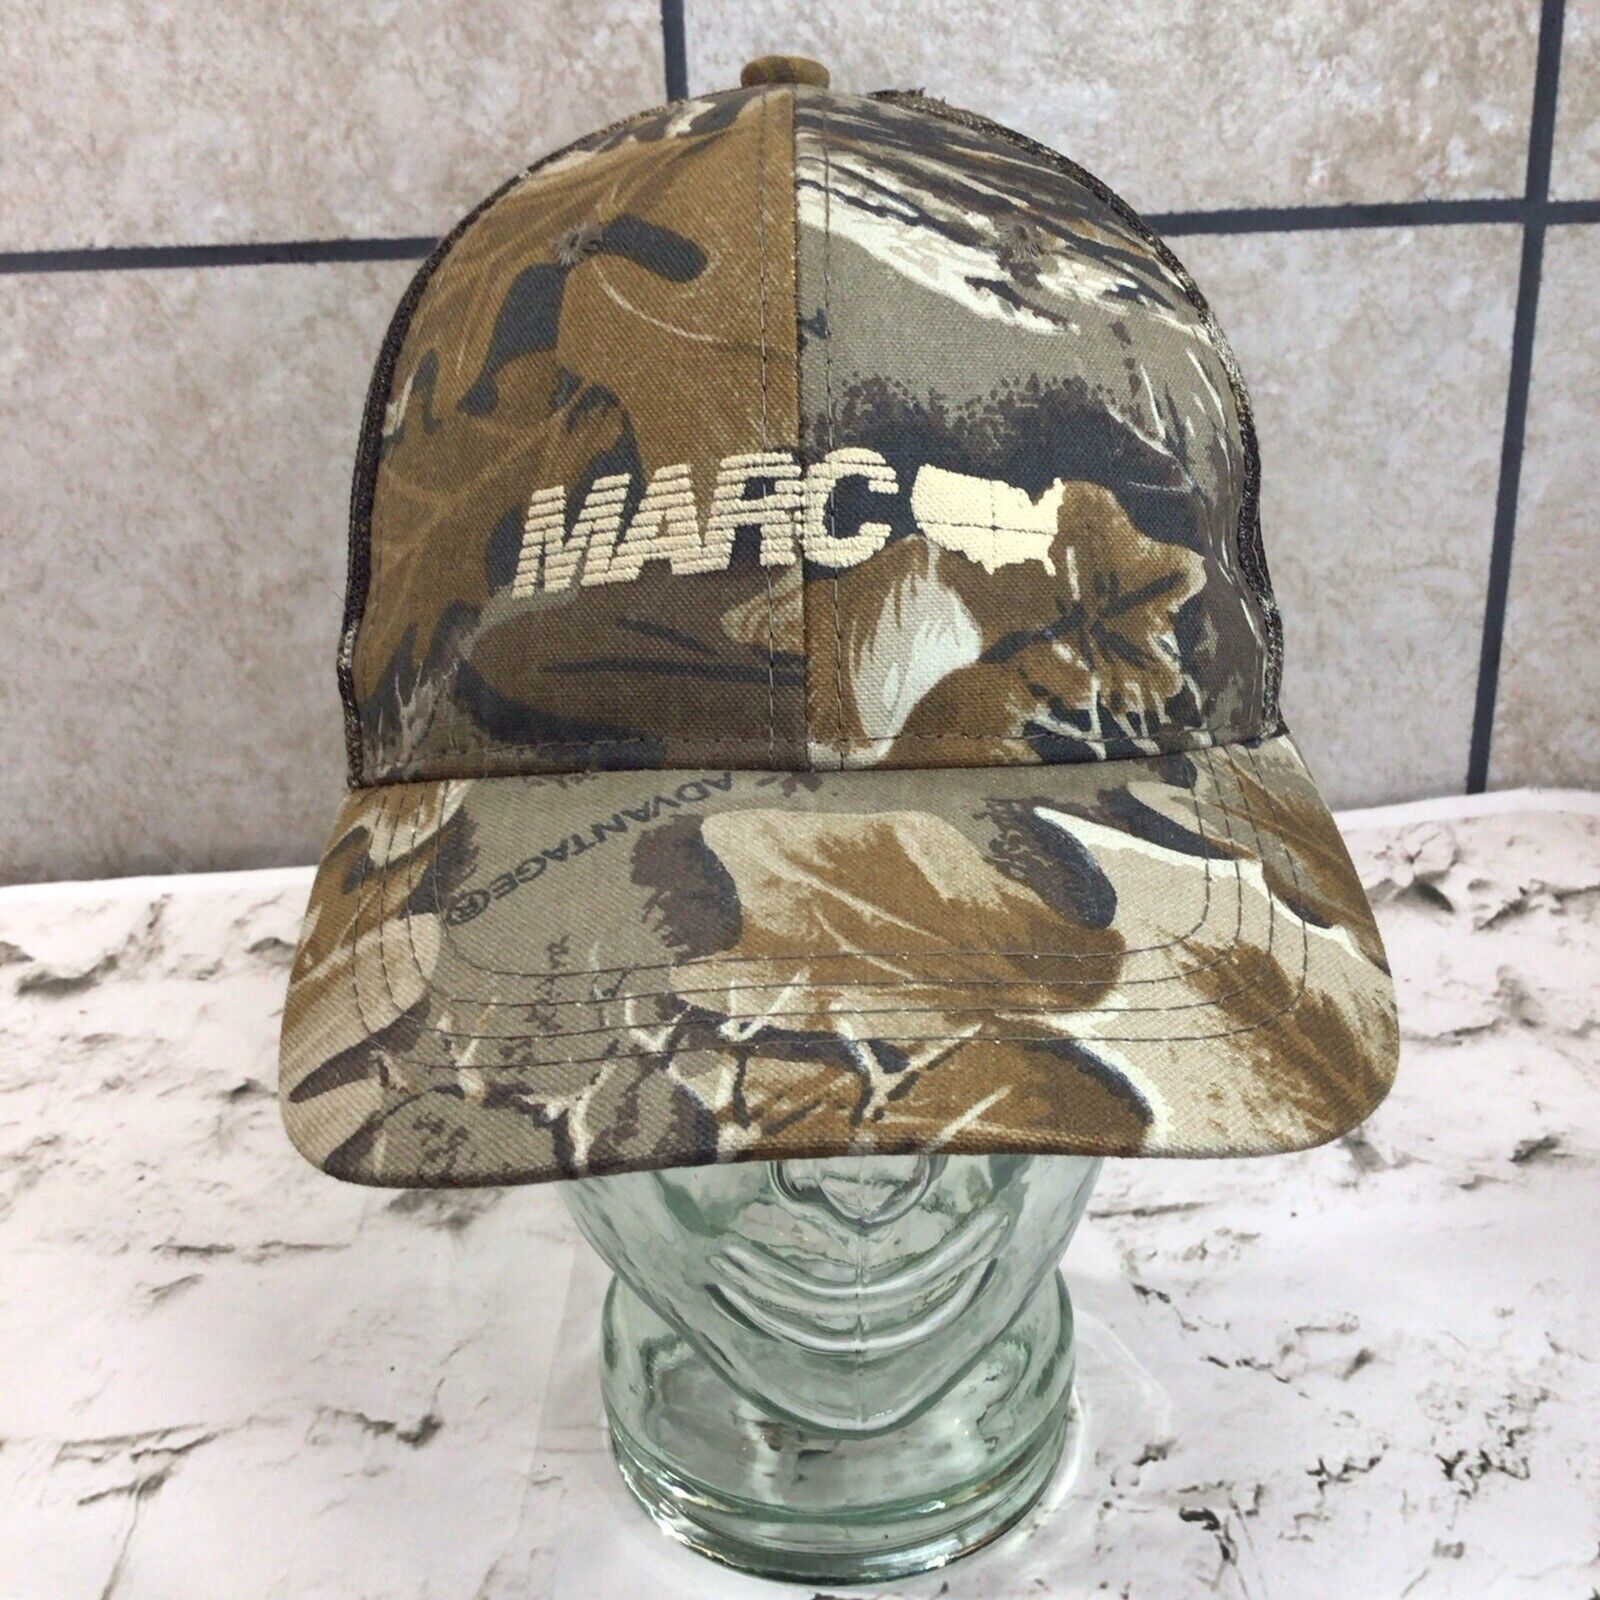 Primary image for Marc Camo Ball Cap Hat Vented Strap Back Adjustable Mens Fashion